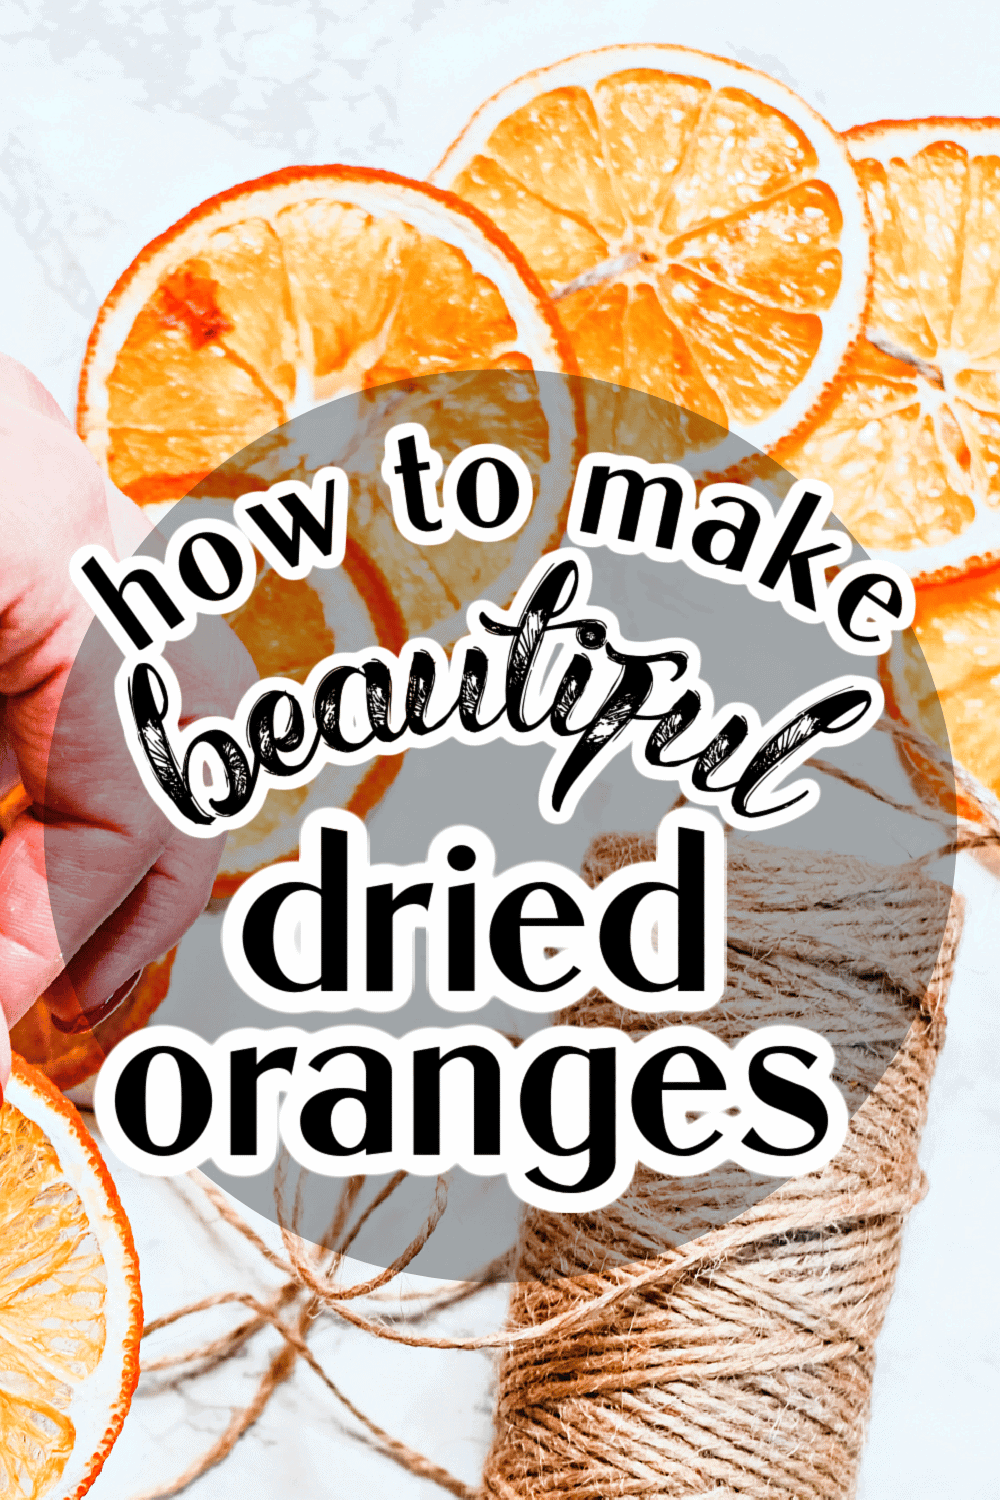 How to make orange slices dried (dried slices of orange are great for Christmas tree decorations or holiday garlands)